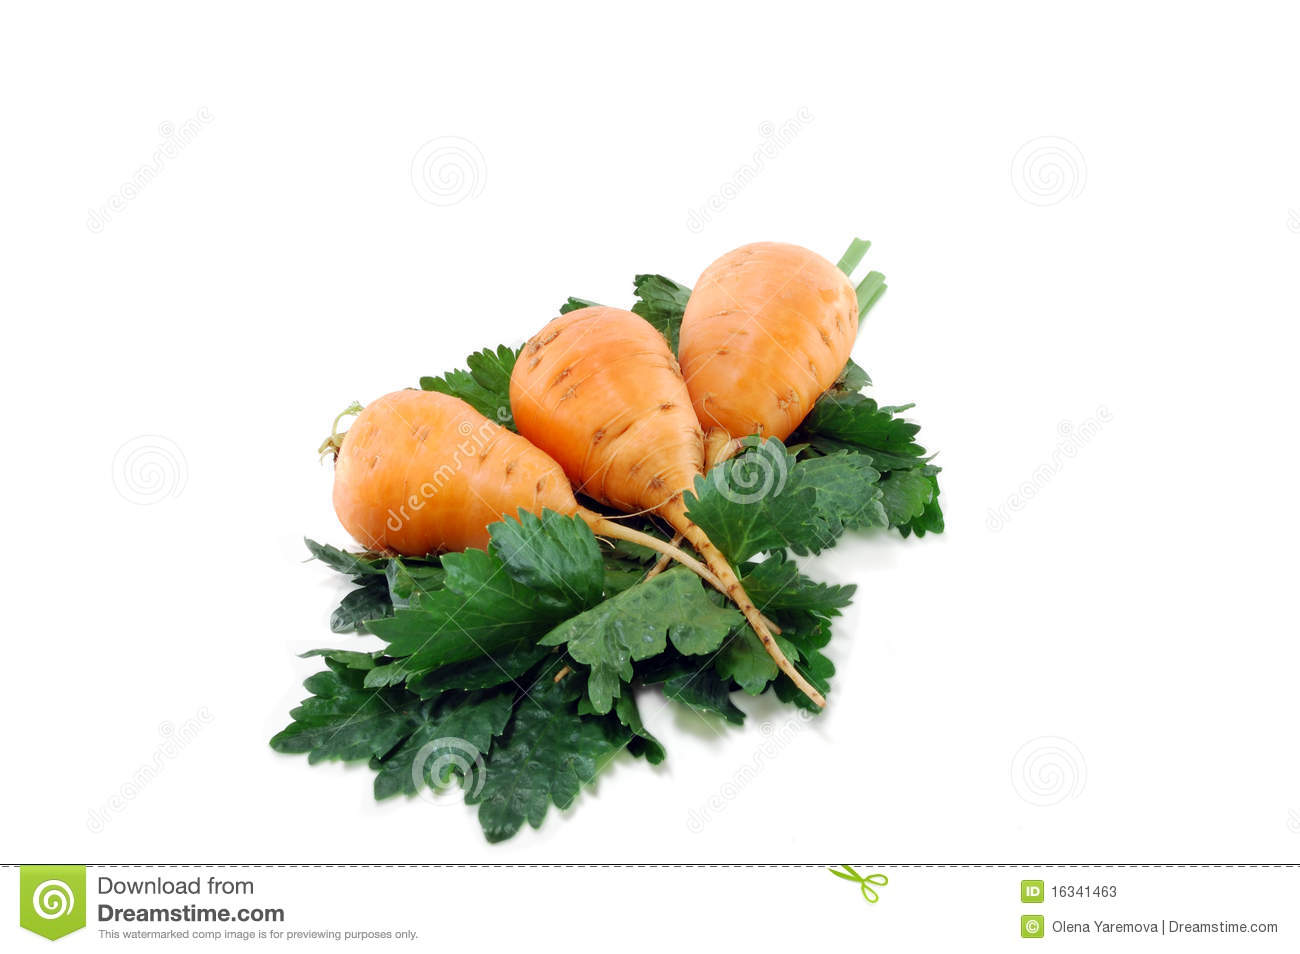 Carrots And Celery Greens Stock Photos   Image  16341463